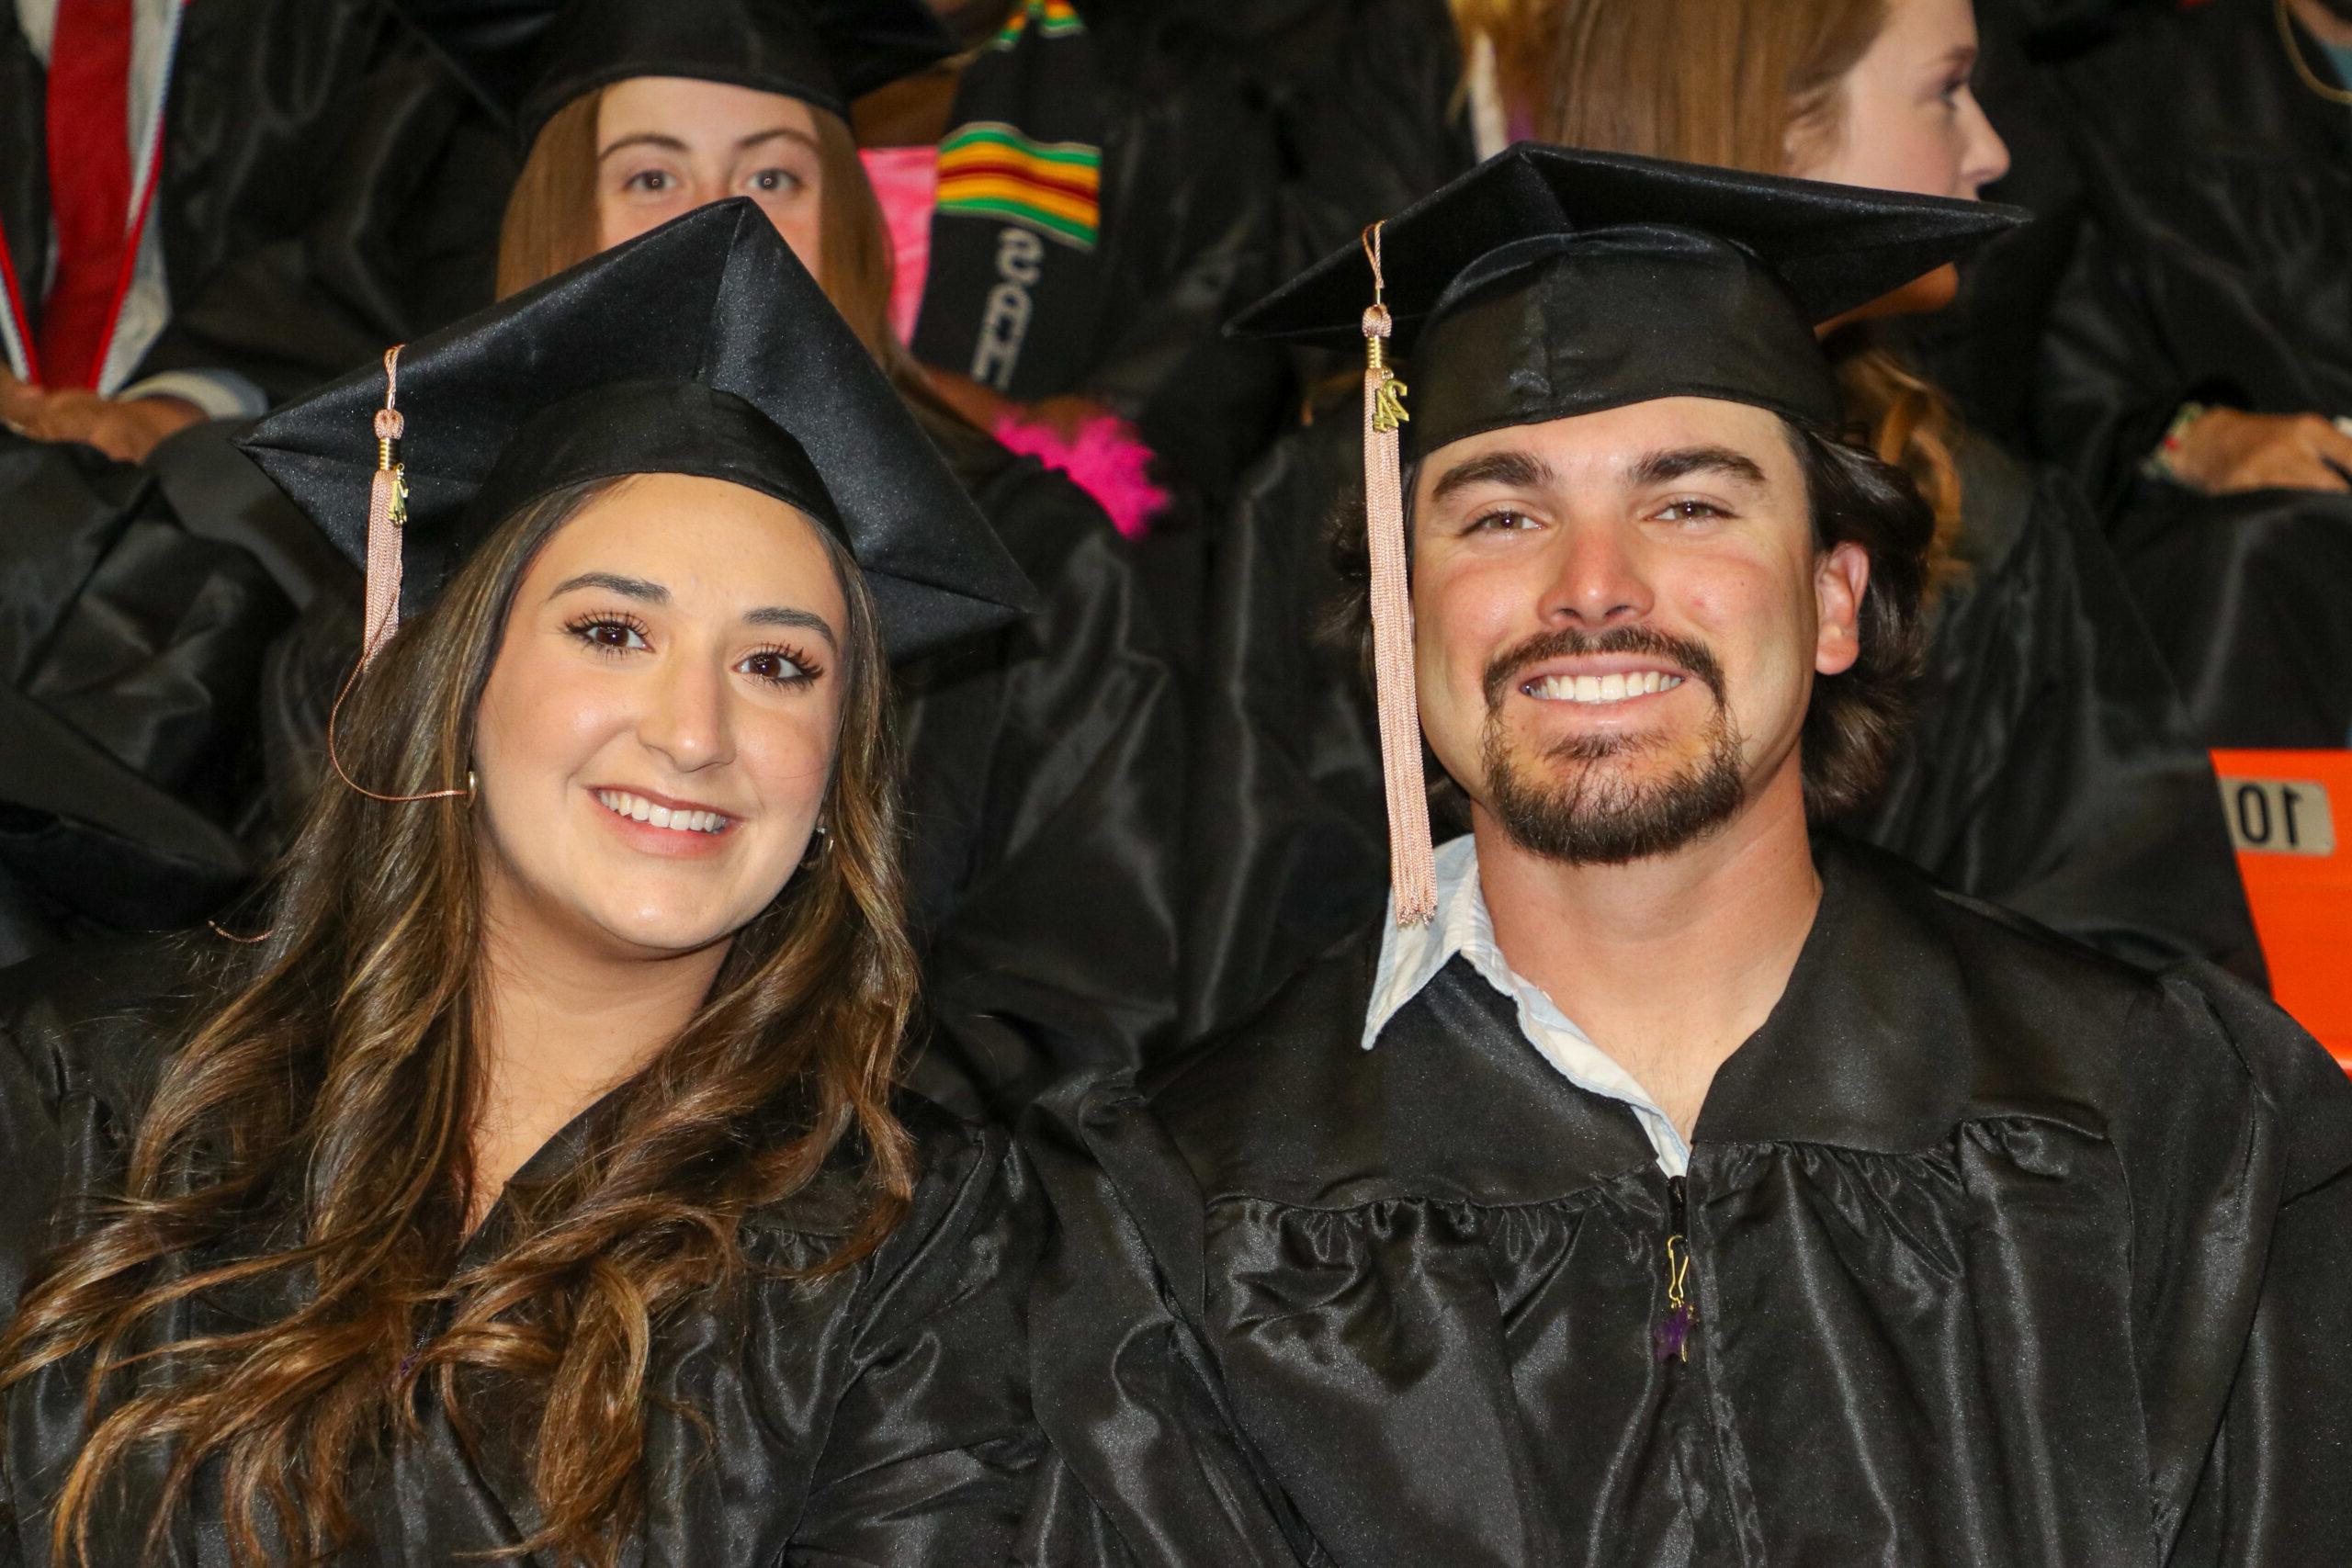 Man and woman sitting side by side in graduation attire